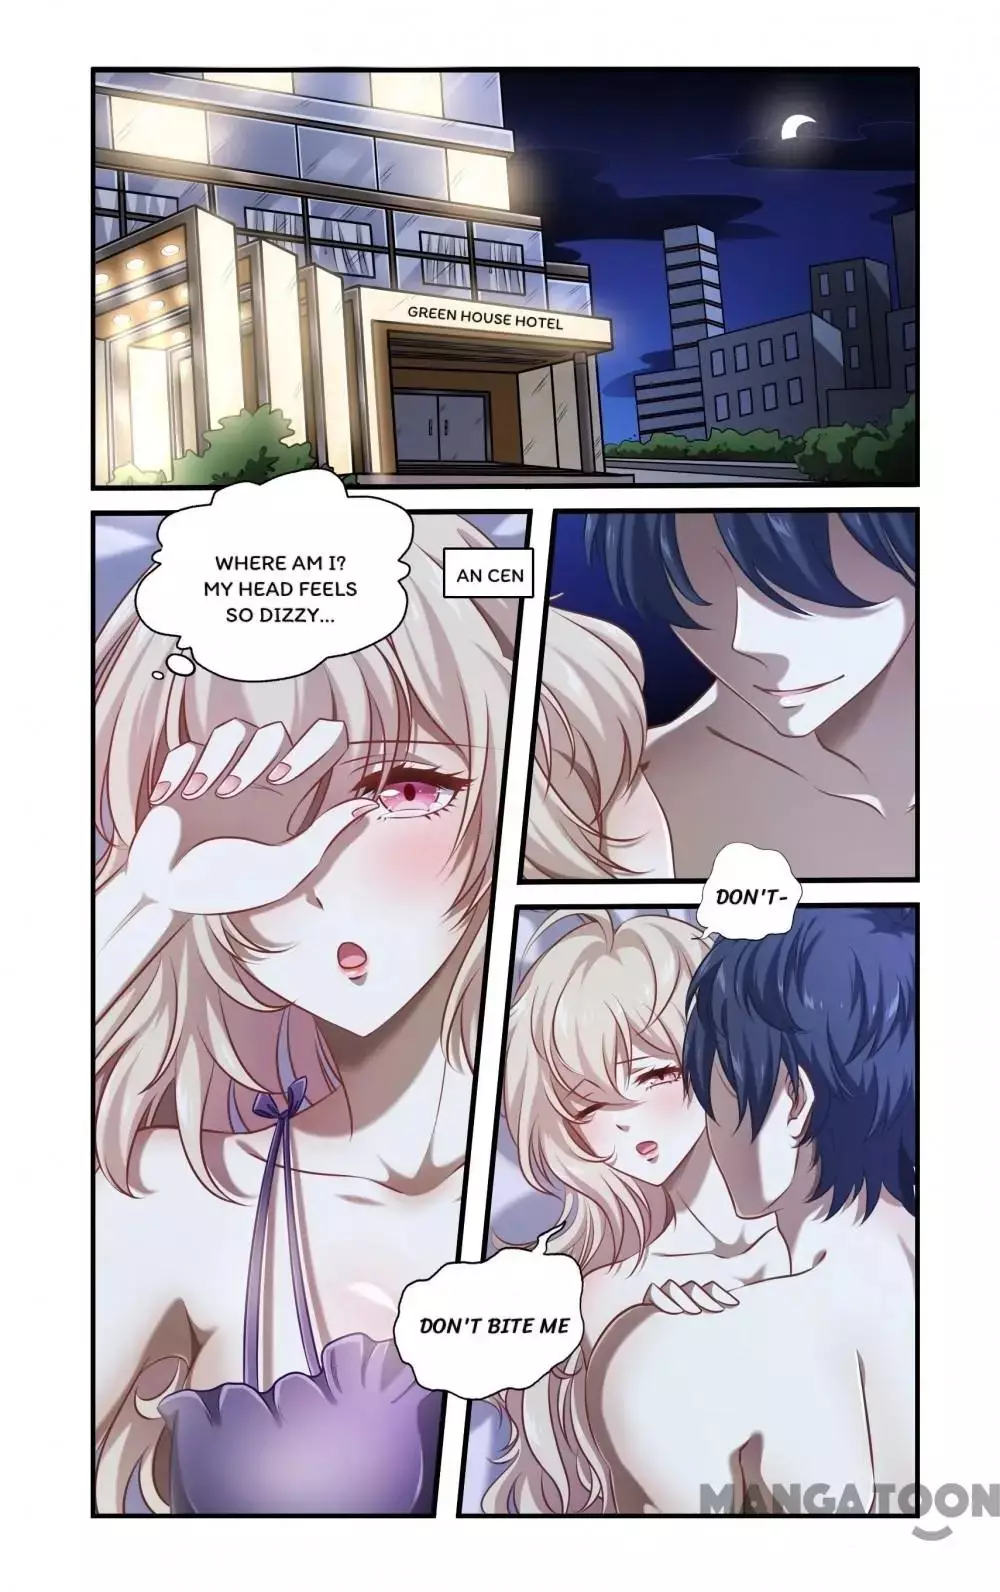 Love At First Night - 1 page 2